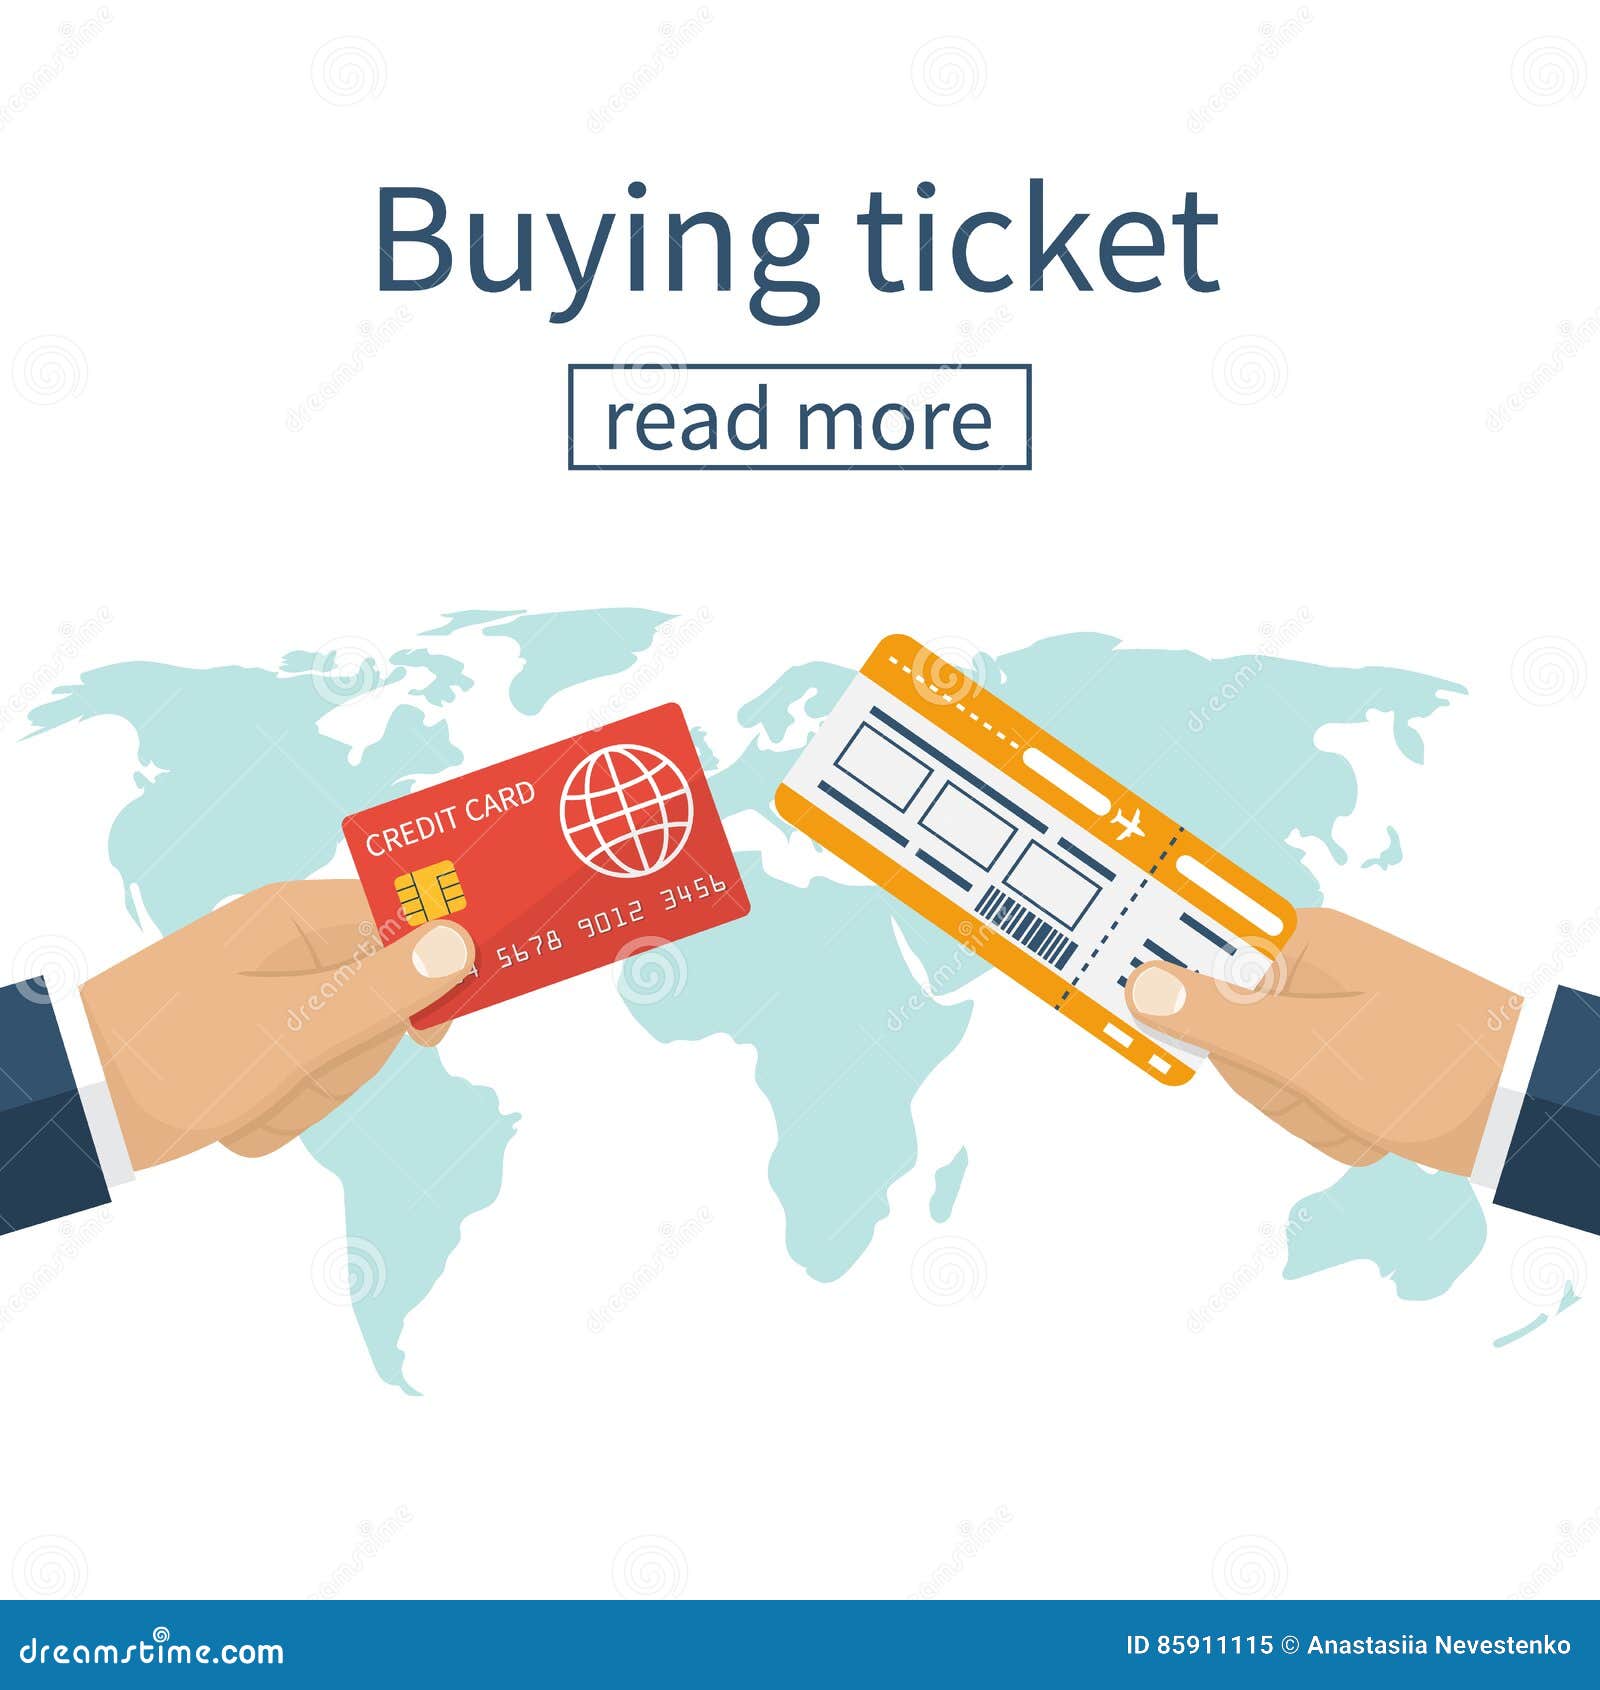 buy-airline-ticket-hand-credit-card-customer-clerk-hand-plane-tickets-isolated-background-world-85911115